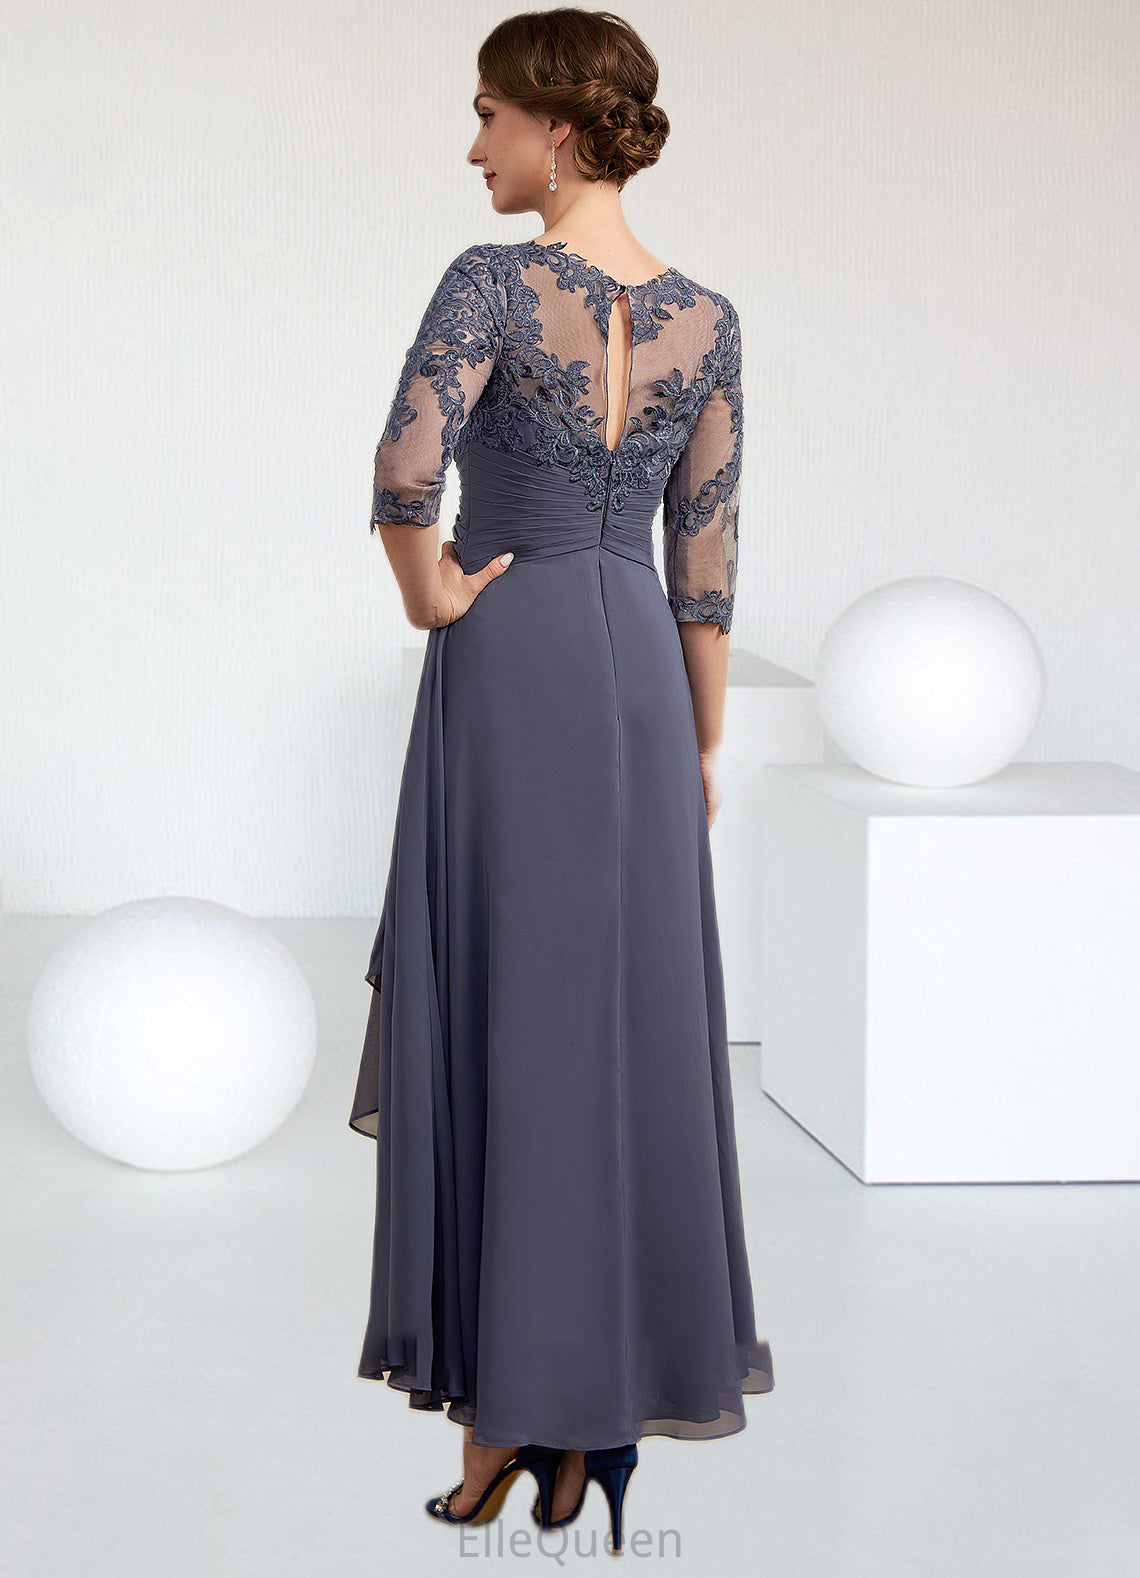 Toni A-Line Scoop Neck Asymmetrical Chiffon Lace Mother of the Bride Dress With Ruffle DG126P0014531